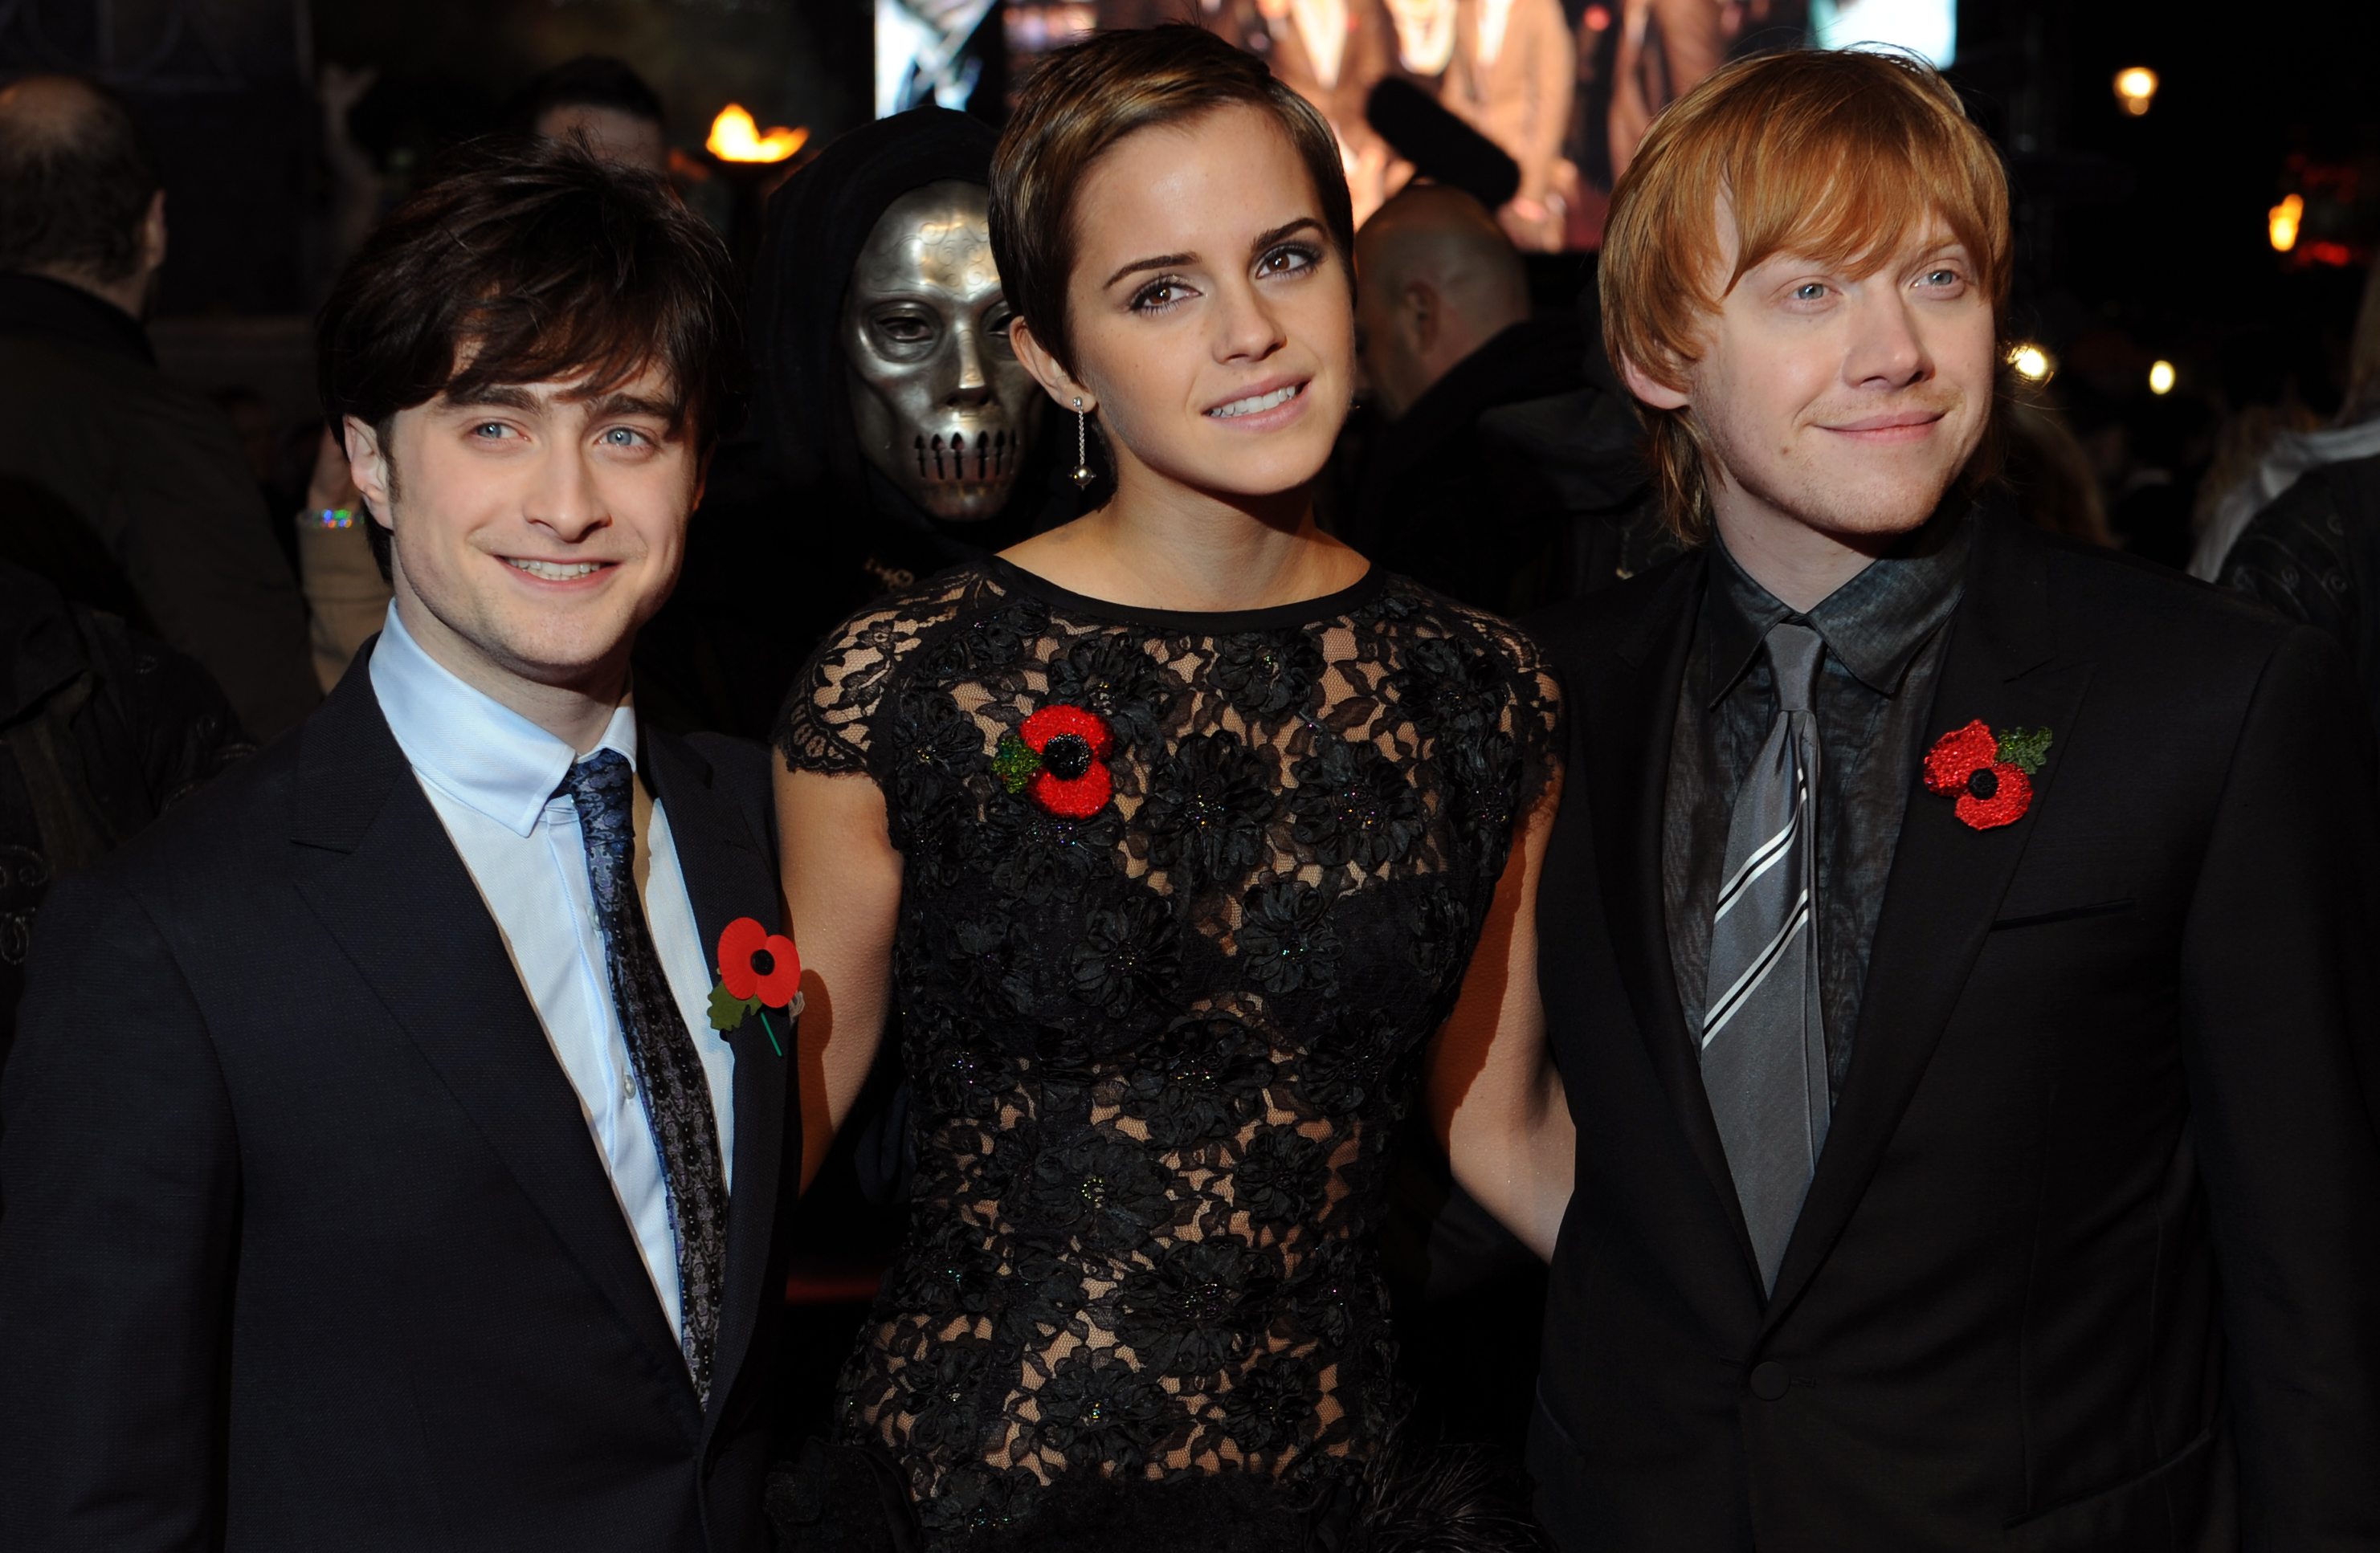 Daniel Radcliffe (L), Emma Watson, (C) and Rupert Grint pose for photographers as they arrive to attend the World Premiere of 'Harry Potter And The Deathly Hallows: Part One' in Leicester Square, central London on November 11, 2010. (BEN STANSALL—AFP/Getty Images)